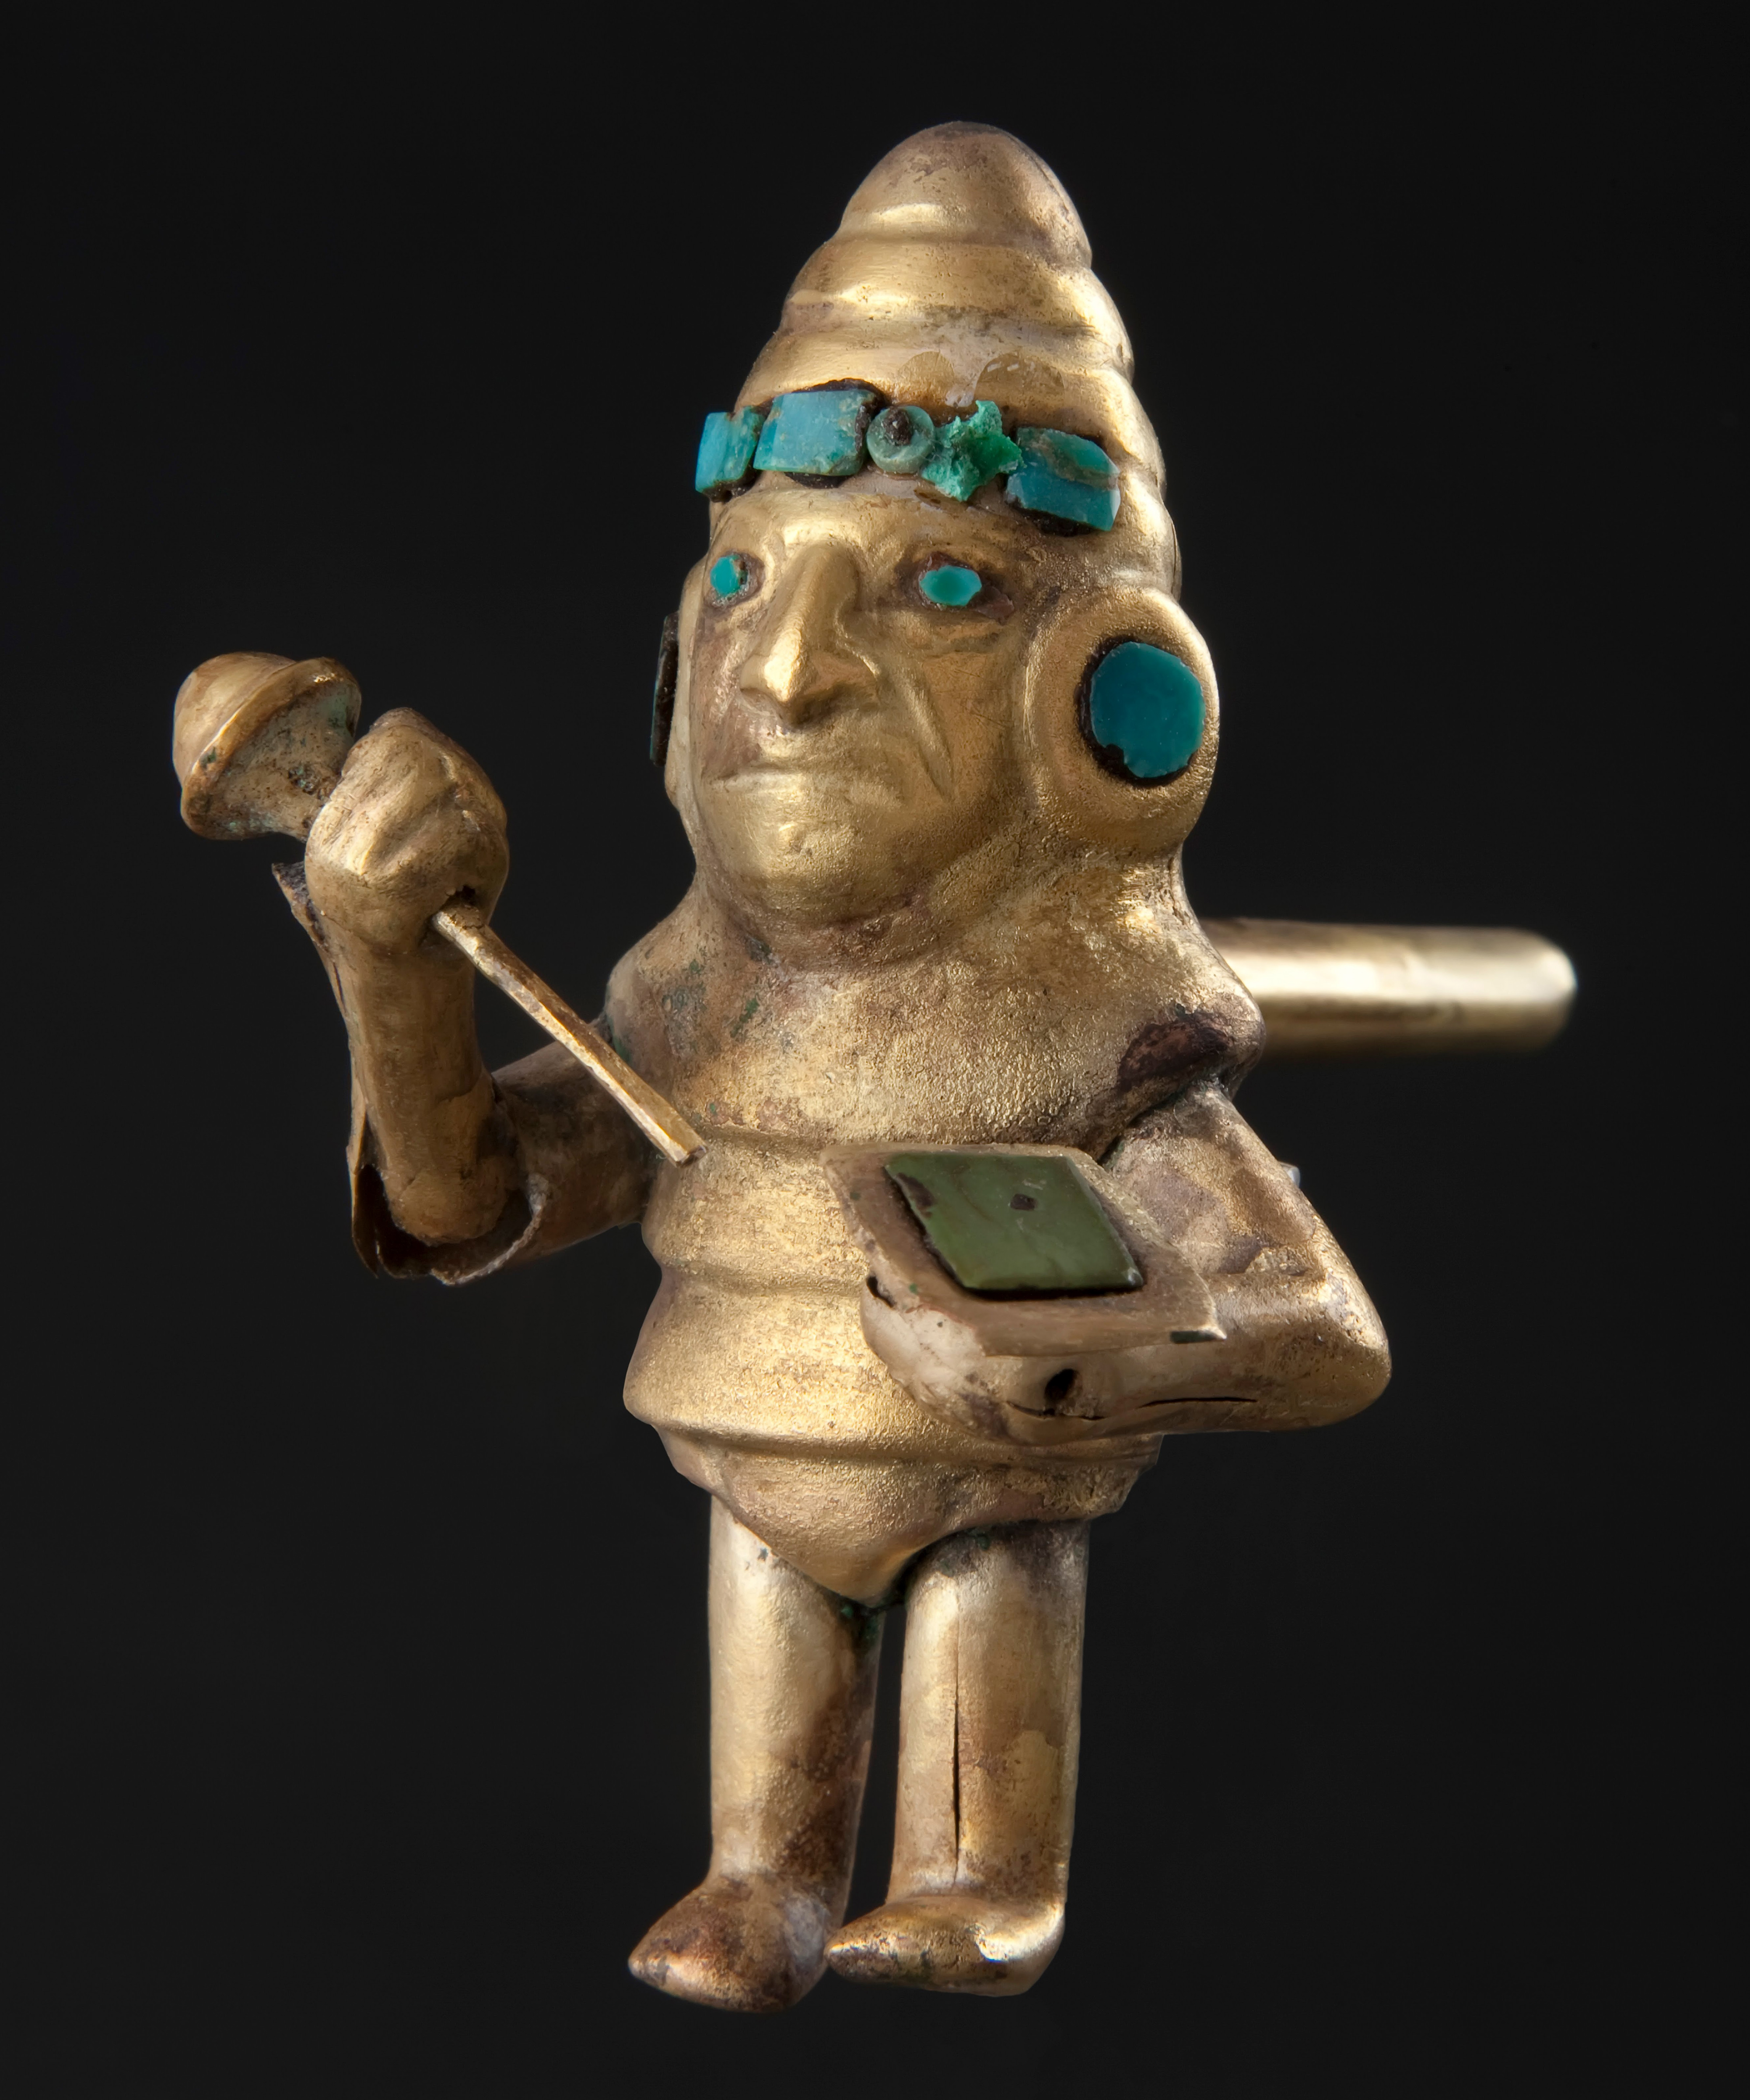 Gold and turquoise whistle shaped like a warrior with club and helmet. Peru, Moche civilization, 1-800 AD.jpg